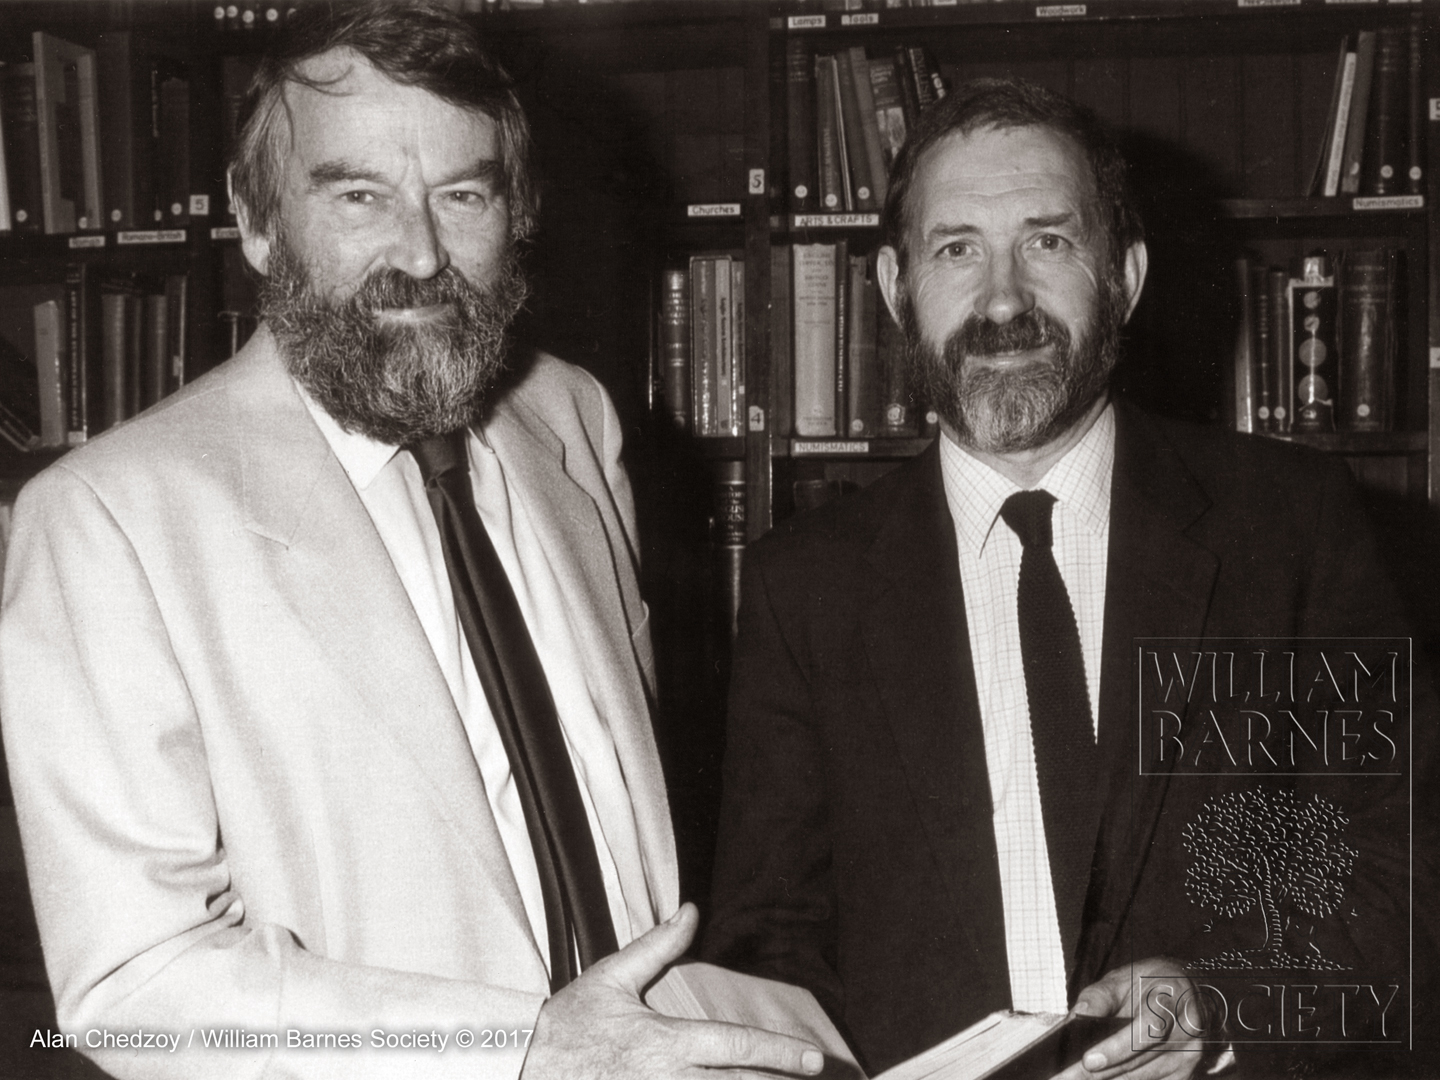 John Fowles and Alan Chedzoy